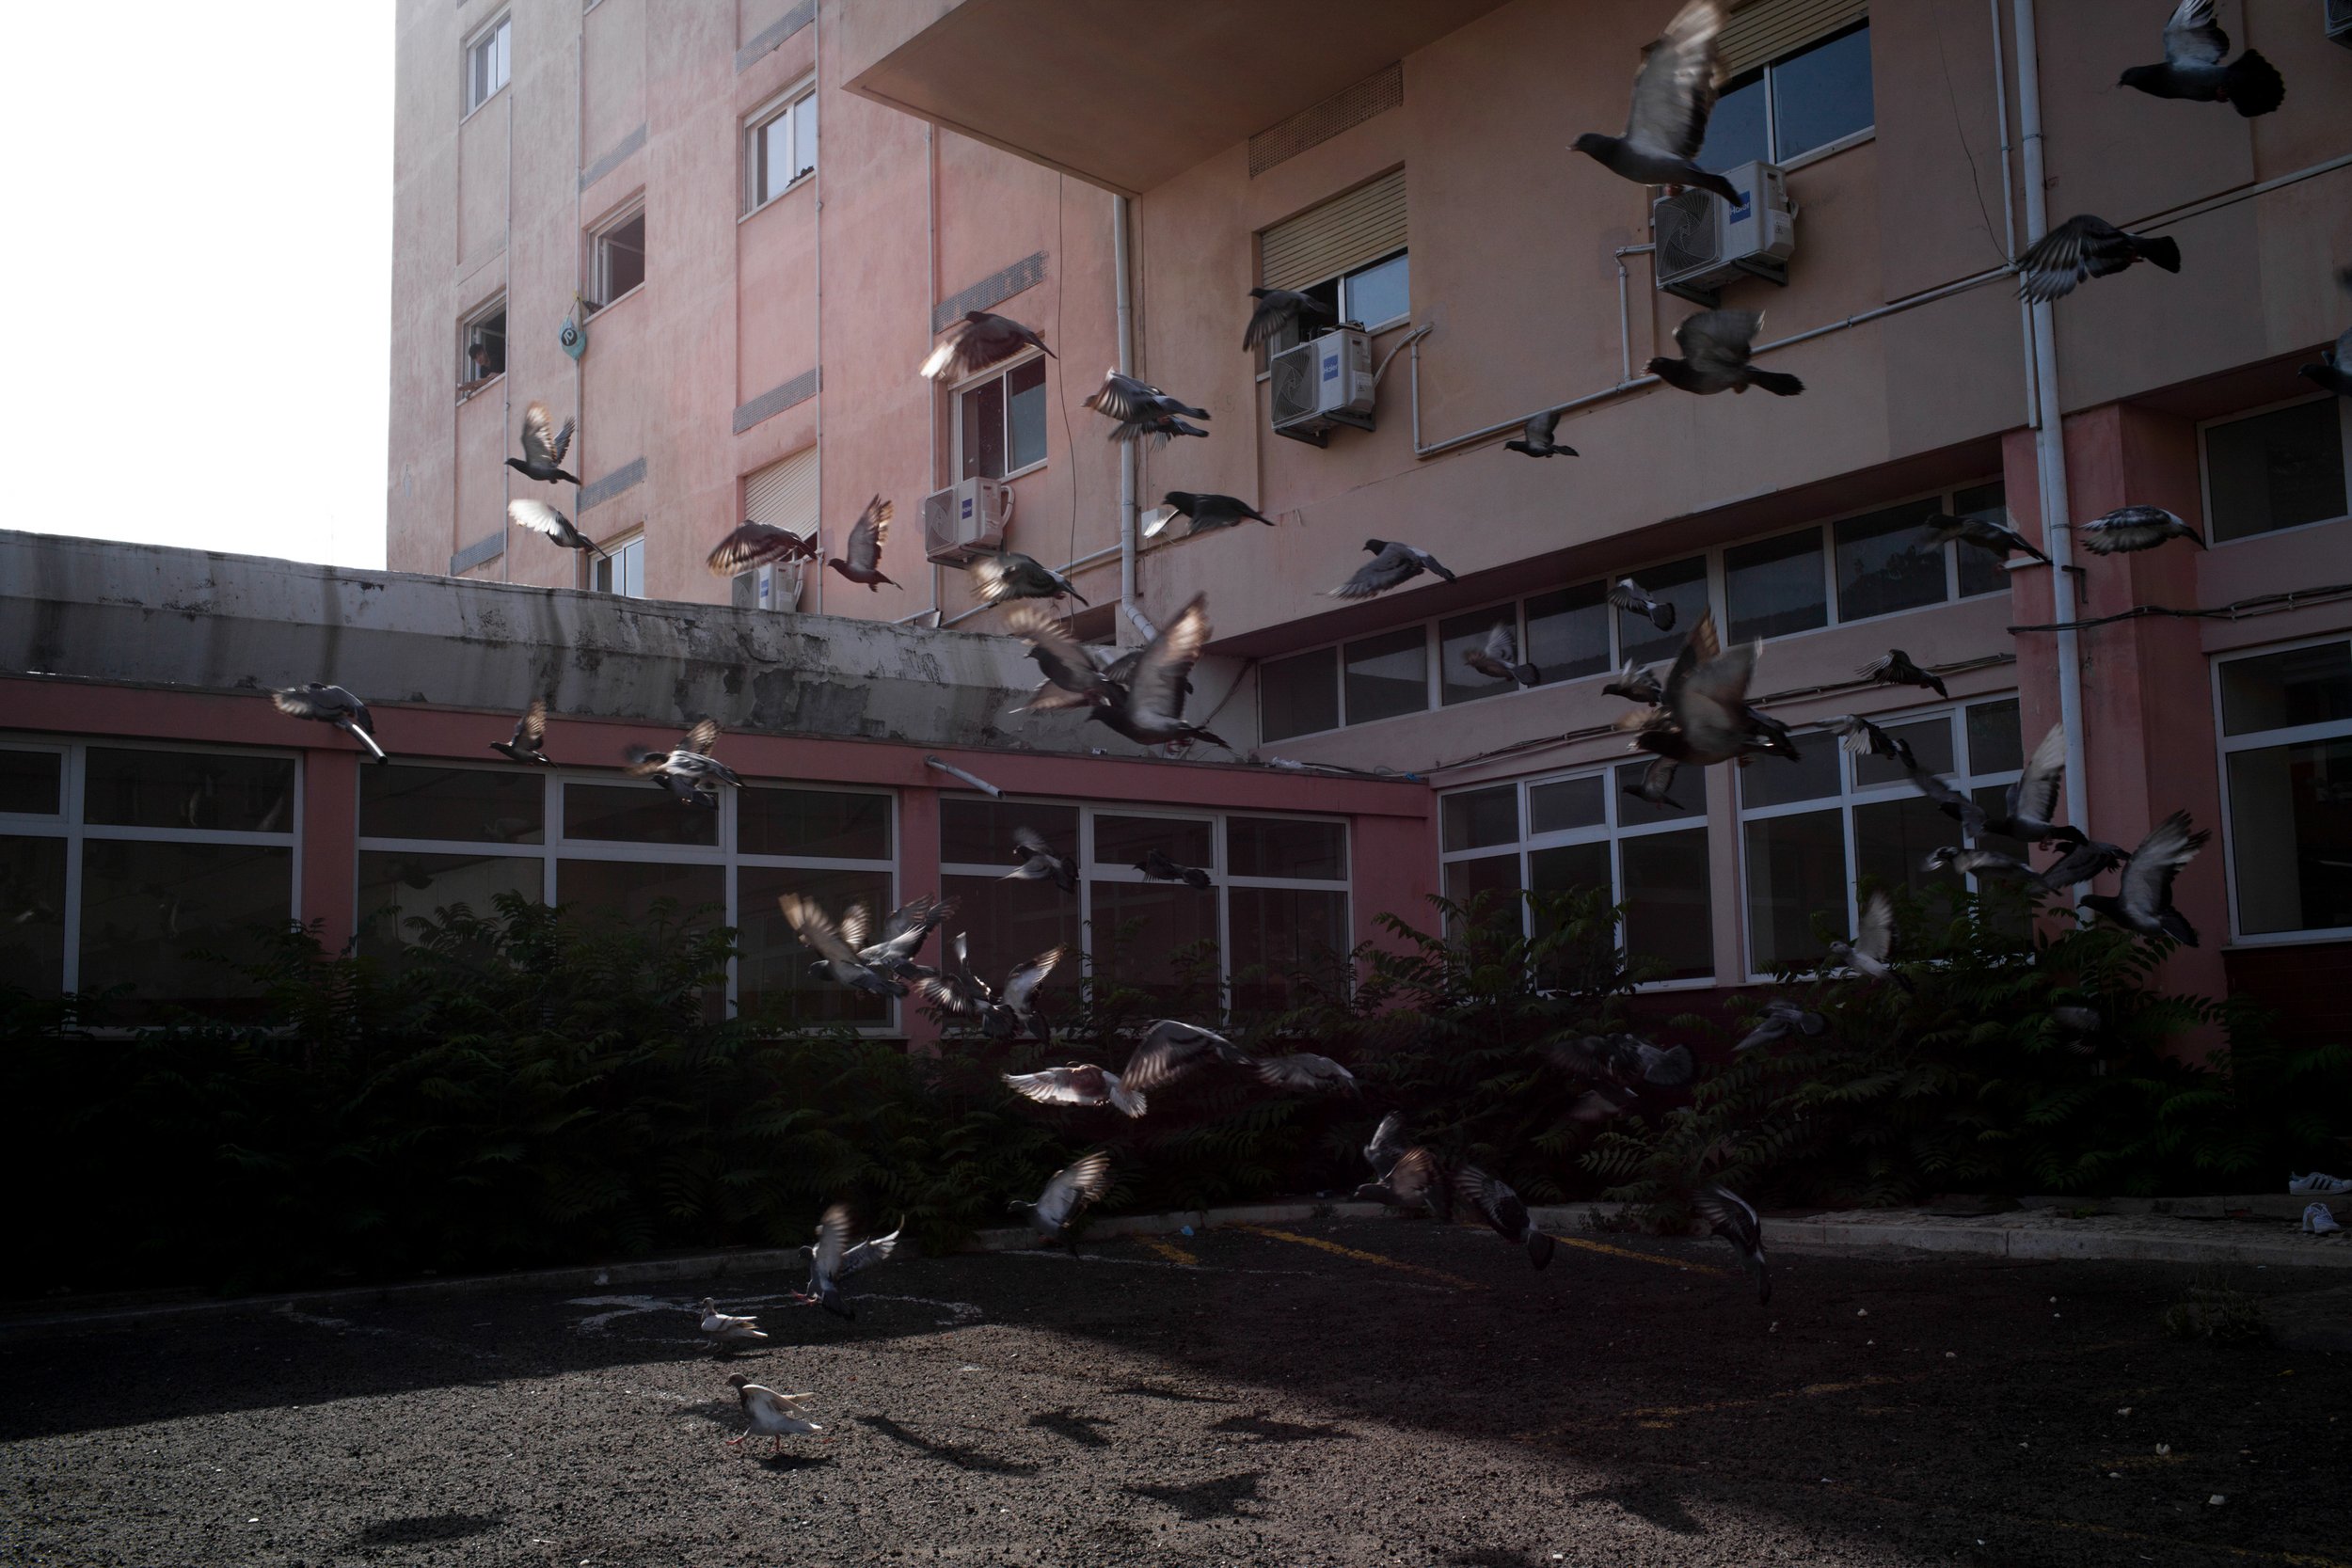  Pidgeons fly in the entrance to the former military Hospital of Ajuda, Lisbon, Portugal, where students and staff of the Afghanistan National Institute of Music lived in for 8 months. July 2022 